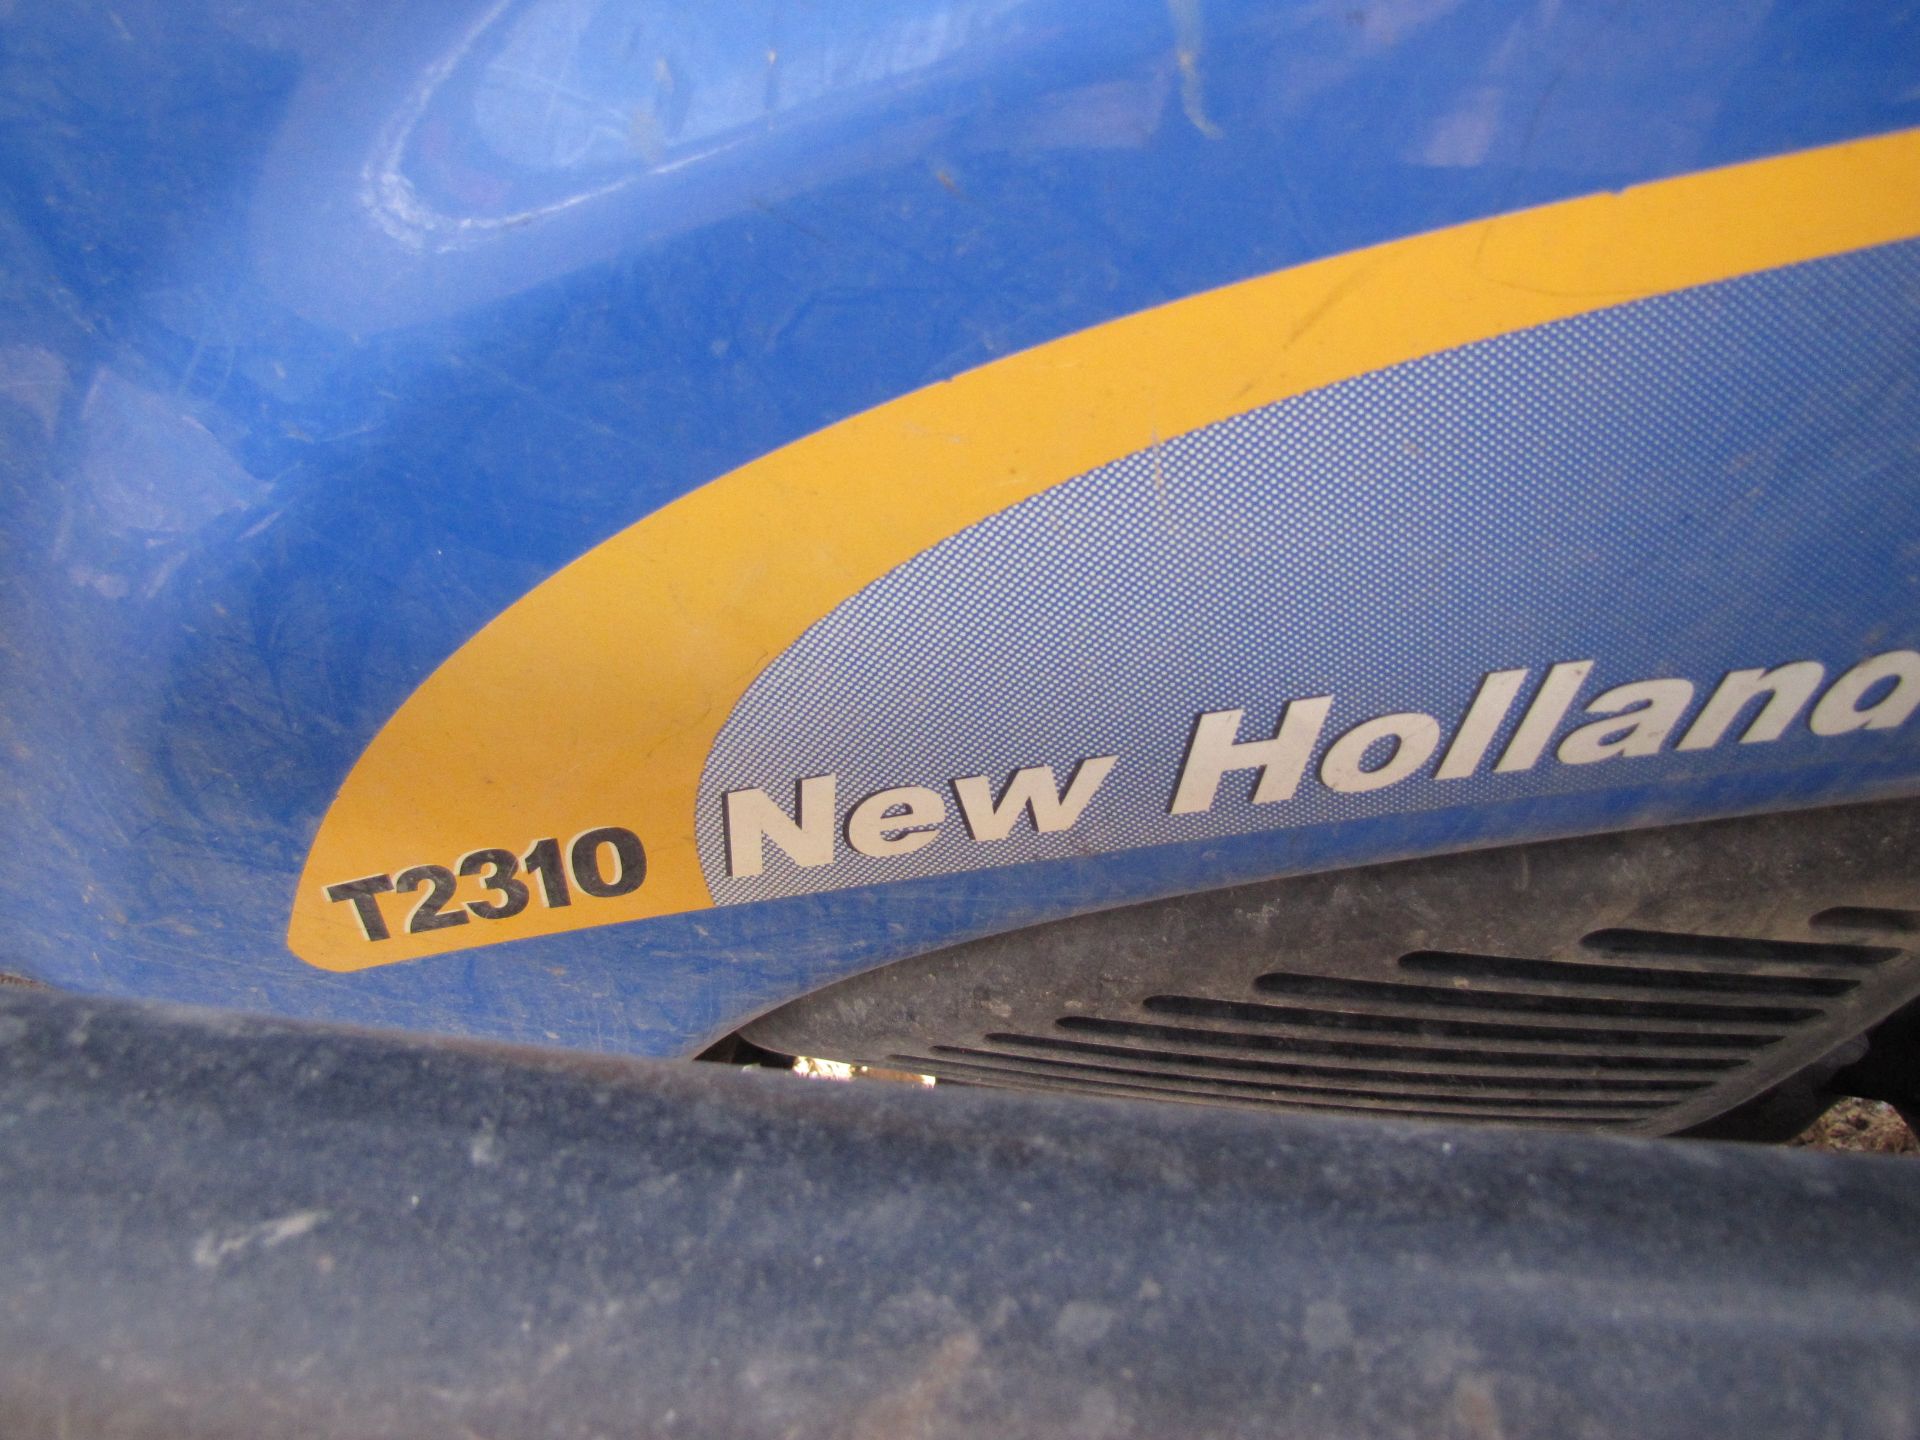 New Holland T2310 tractor w/ 250TL loader - Image 39 of 42